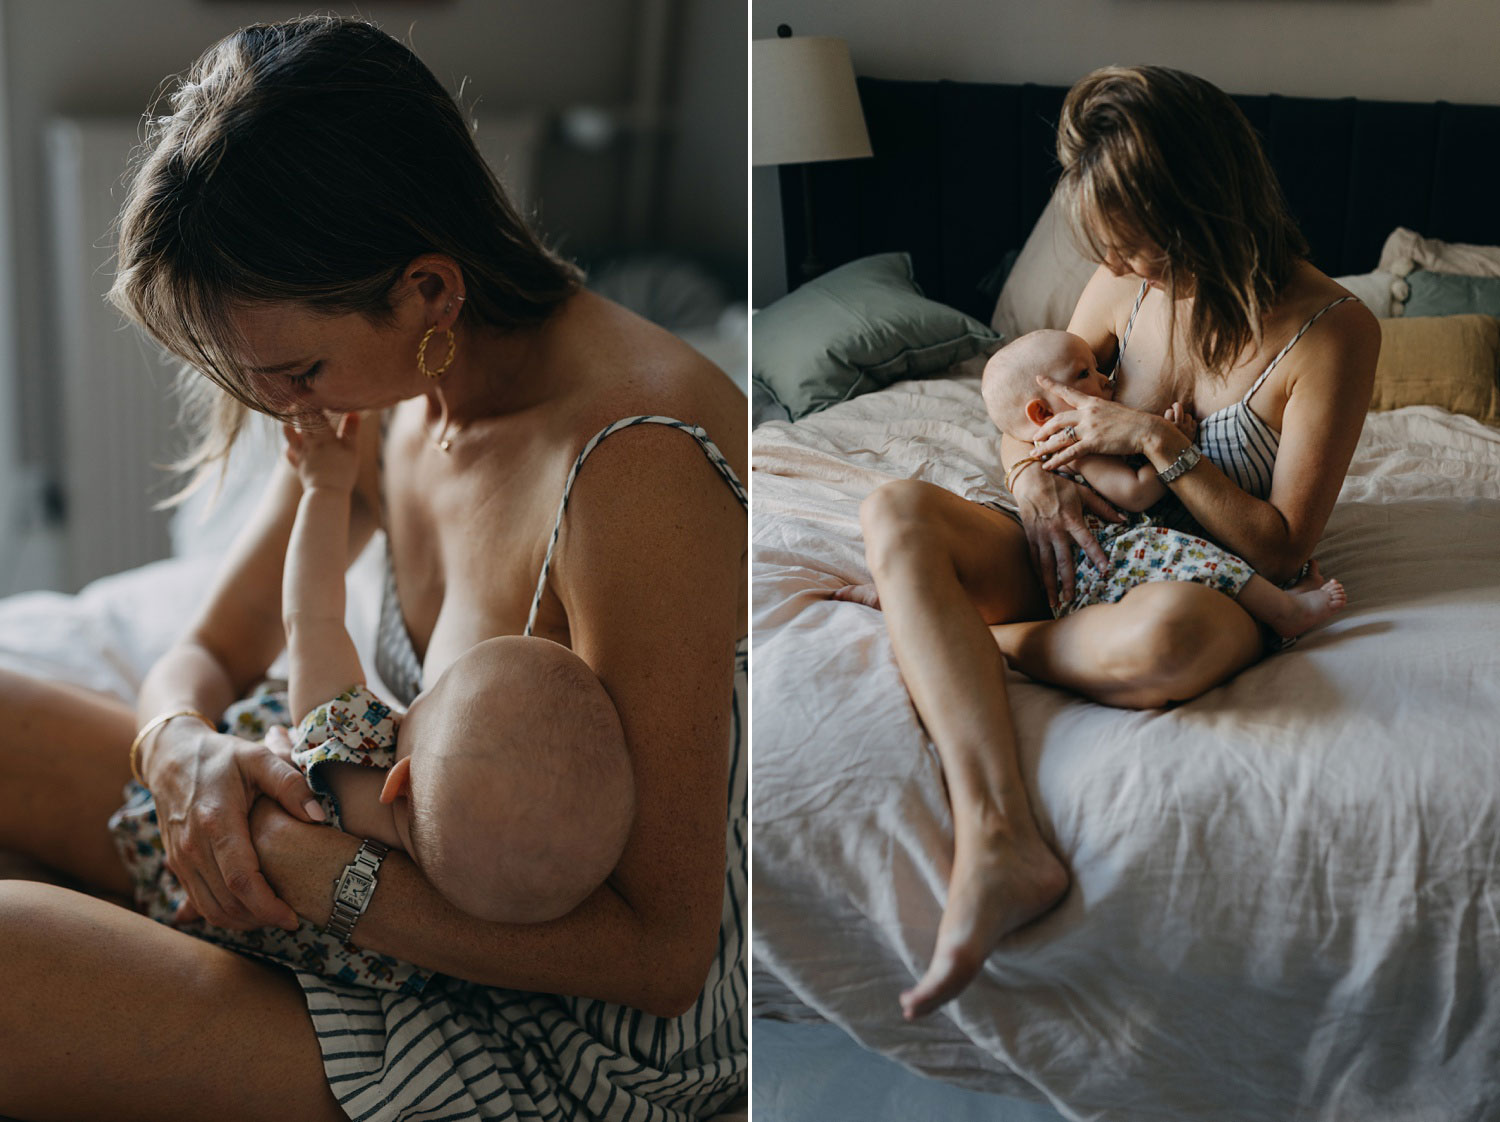 Image of a baby peacefully being breastfed during a family photo session at home in Copenhagen